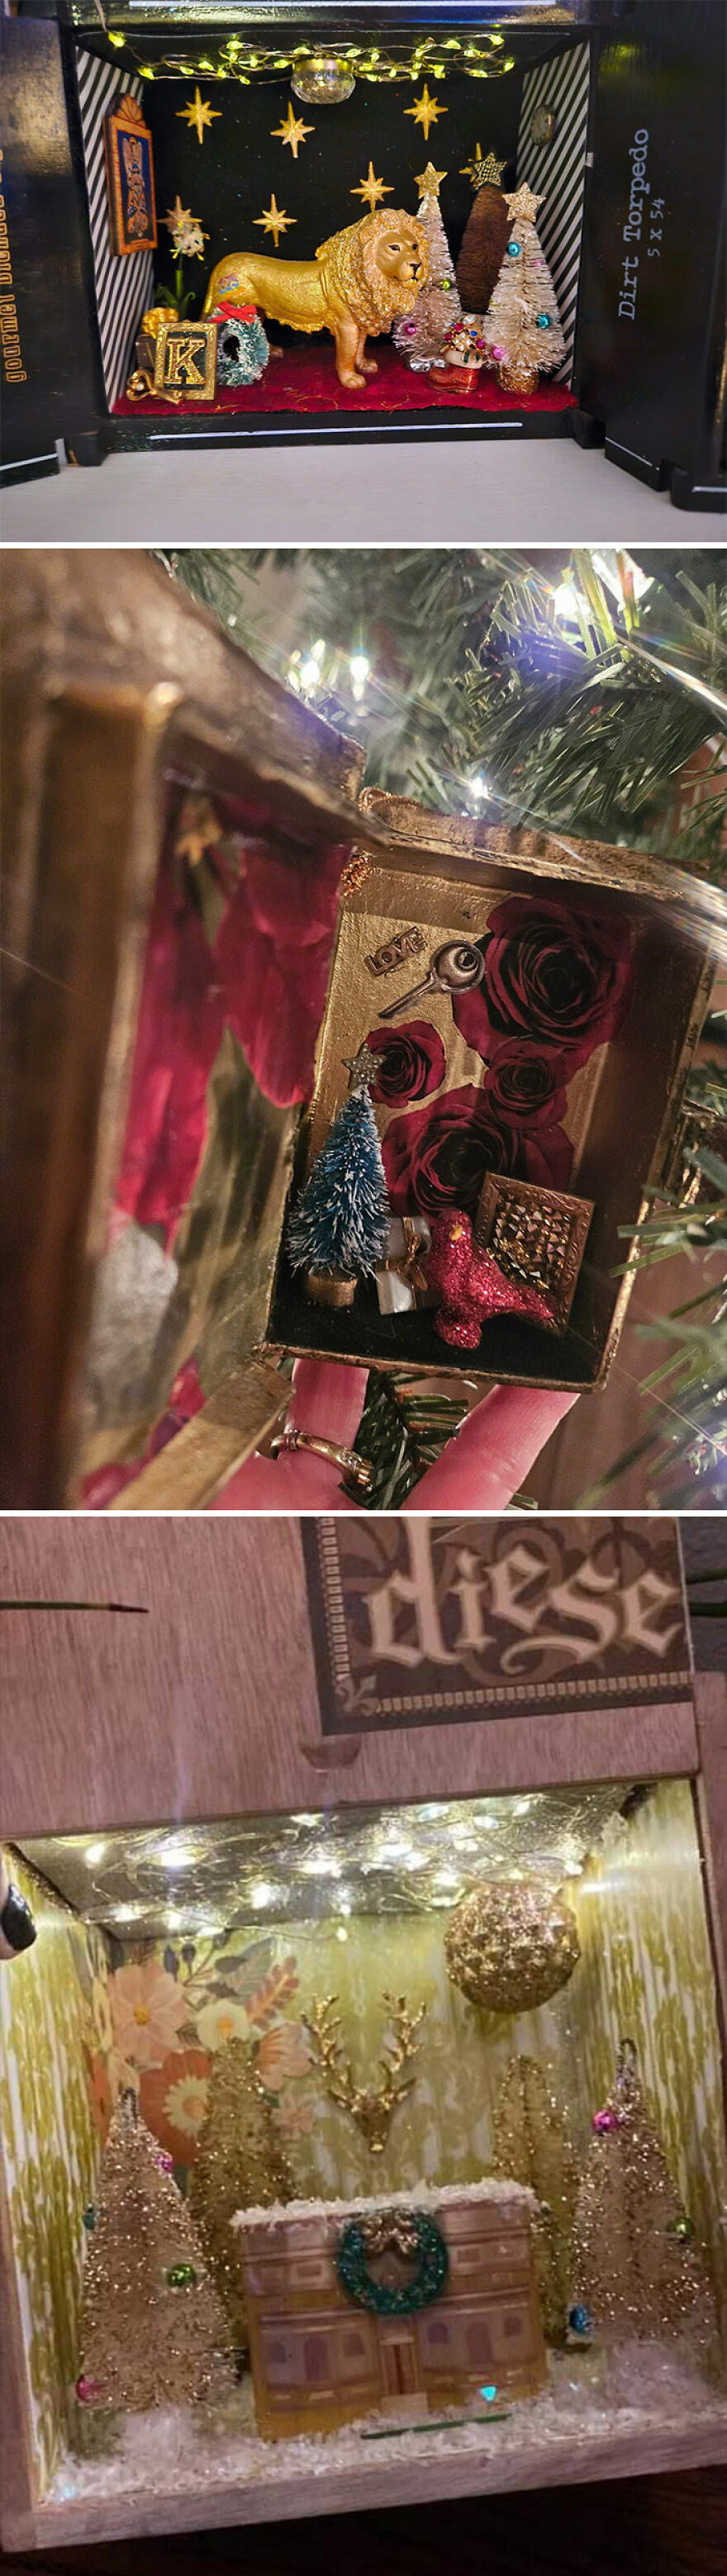 Several Years Ago When I Had No Extra Money, I Started Salvaging Items And Making Christmas Scenes Inside Small Boxes. I've Made Several Since, They Are Quite A Hit. All Found And Thrifted Objects, This One Even Has Cute Doorknobs That I Got From A Box Of Dollhouse Minis On Fb Marketplace! Edit: Pics Of Others I've Made Are In The Comments! People Always Ask Me Why I Don't Sell These But I Wouldn't Even Know What To Charge?? I've Always Made Them As Gifts So They Are Always A Little Bit Personalized Whether It's Color Or Theme Or Whatever. I Use Jewelry, Gift Wrap, Ornaments, Toys, Wrapping Paper, Etc, And Lots Of Glue. They're Very Fun To Make And People Really Do Love Receiving Them! Thank You For Looking And For All The Love!